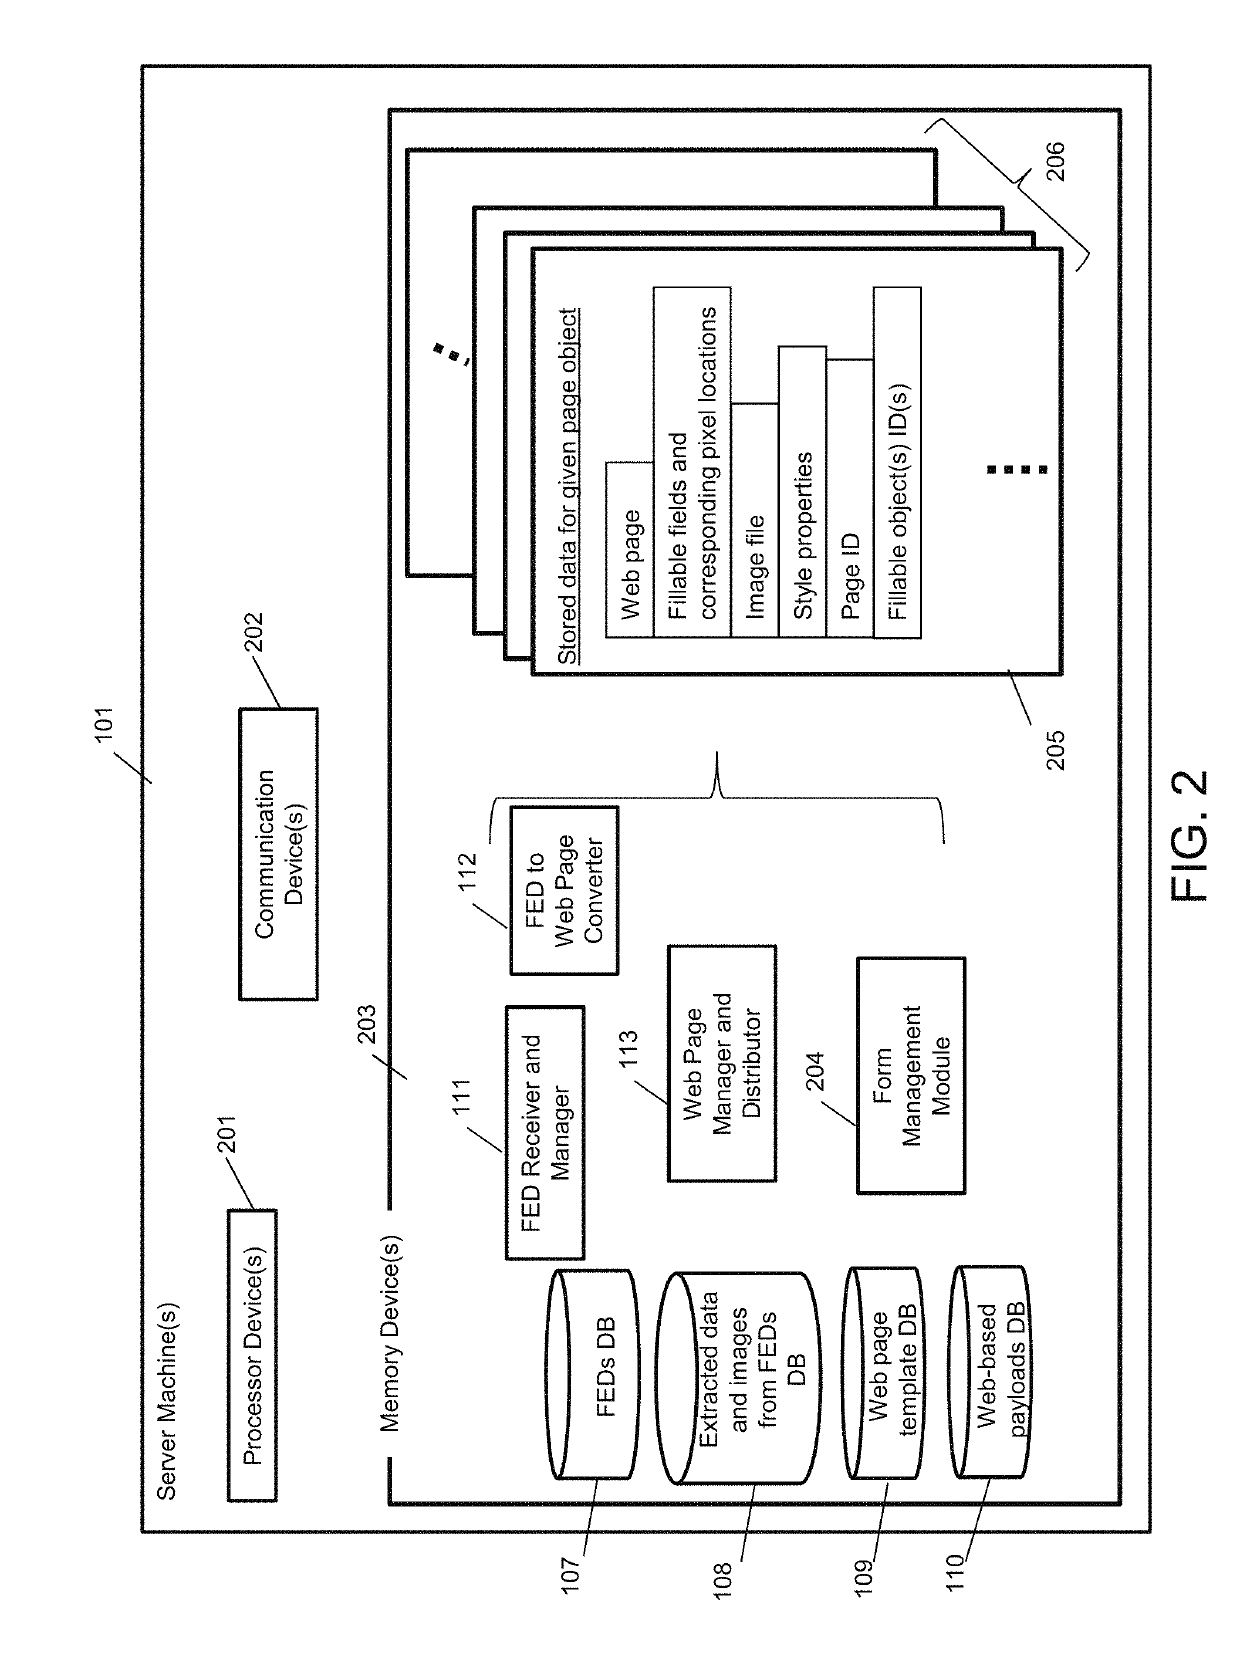 Automated Generation of Web Forms Using Fillable Electronic Documents